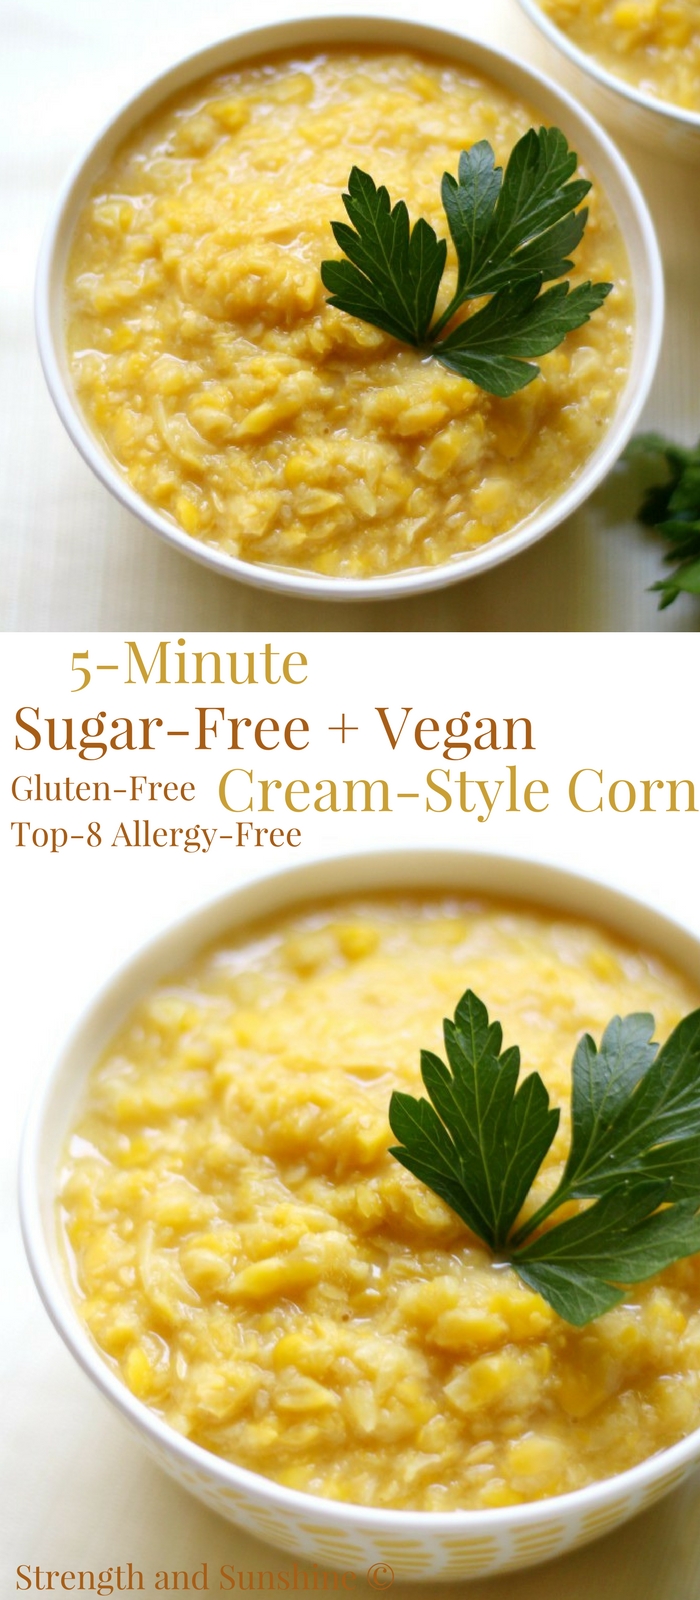 5-Minute Sugar-Free + Vegan Cream-Style Corn (Gluten-Free) | Strength and Sunshine @RebeccaGF666 A classic side dish, lightened up, 2 ingredients, and takes only 5 minutes! This sugar-free & vegan cream-style corn recipe is on the family dinner table in a snap! Creamed corn without the cream and is gluten-free & top-8 allergy-free too! #creamedcorn #corn #glutenfree #vegan #dairyfree #sugarfree #sidedish